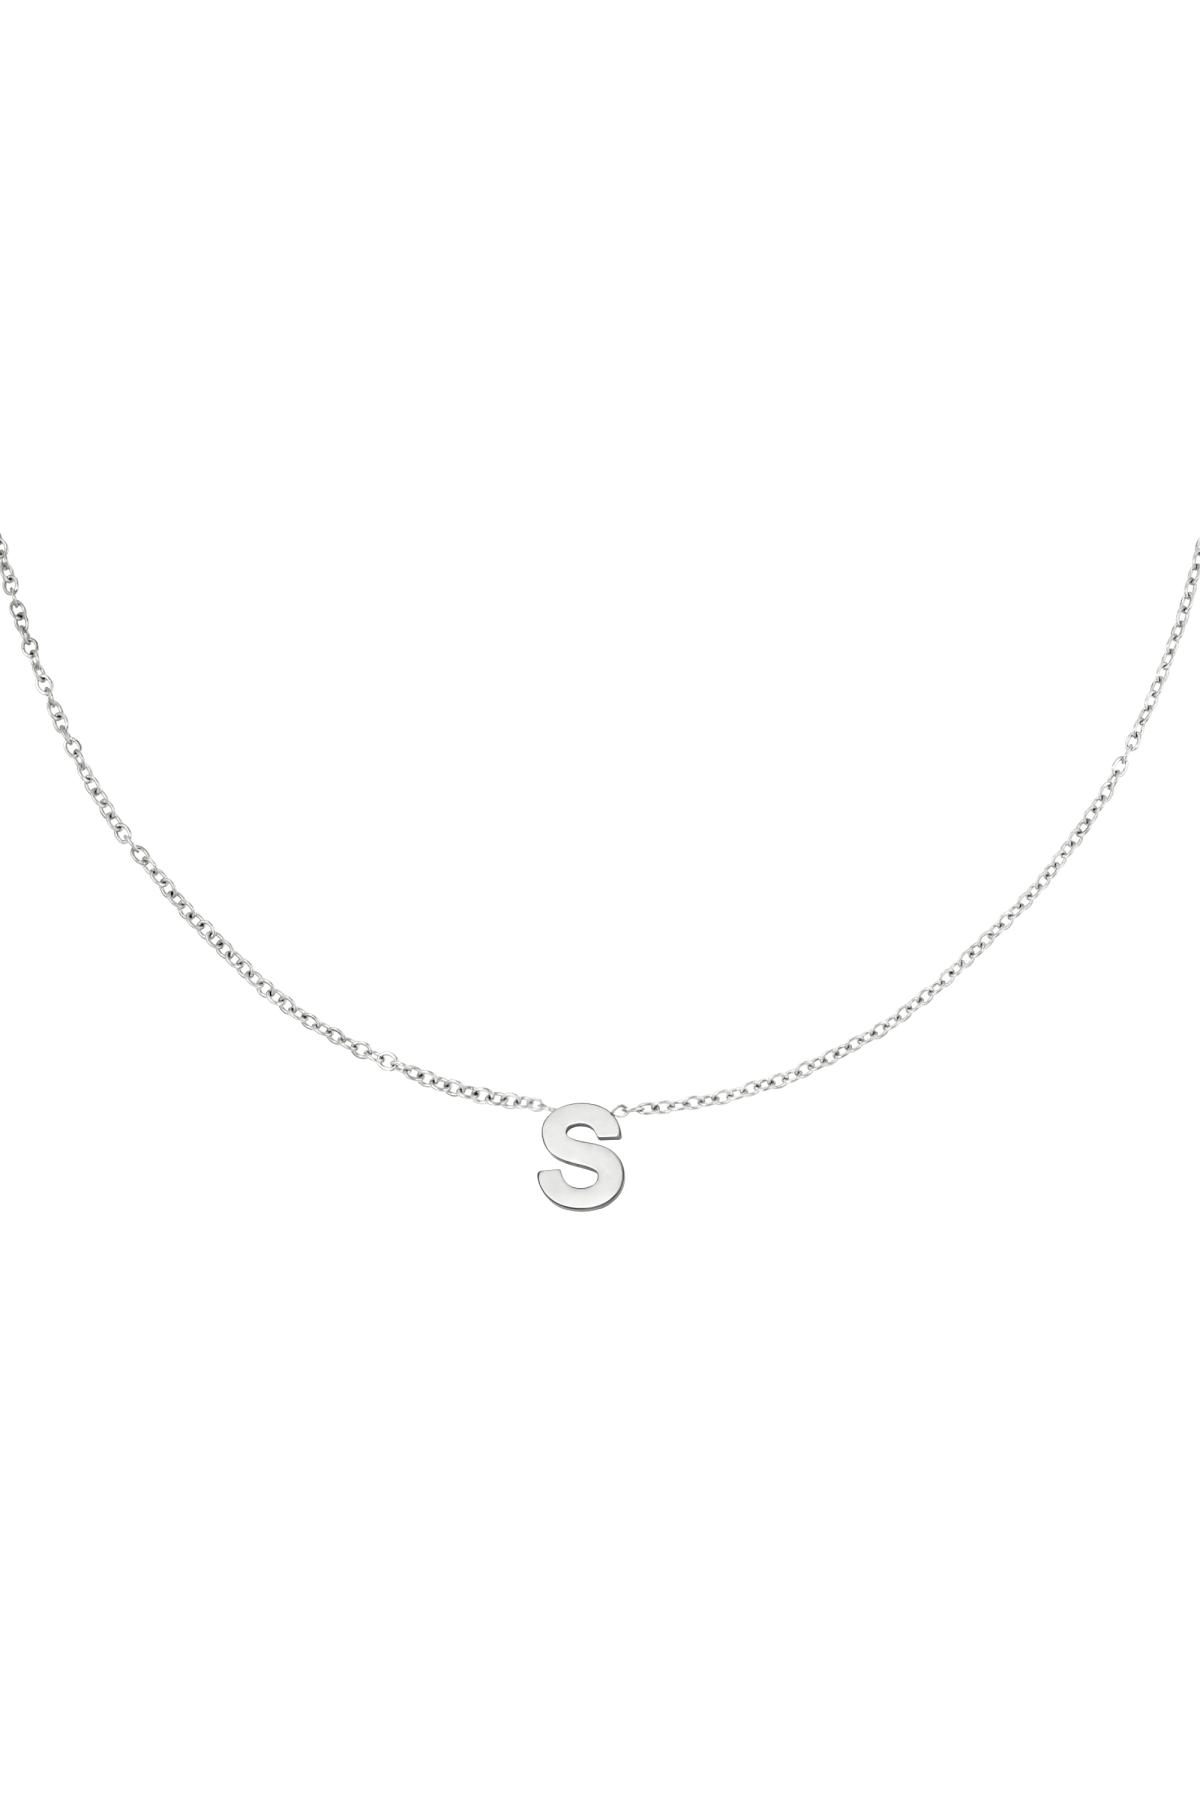 Stainless steel necklace initial S Silver 